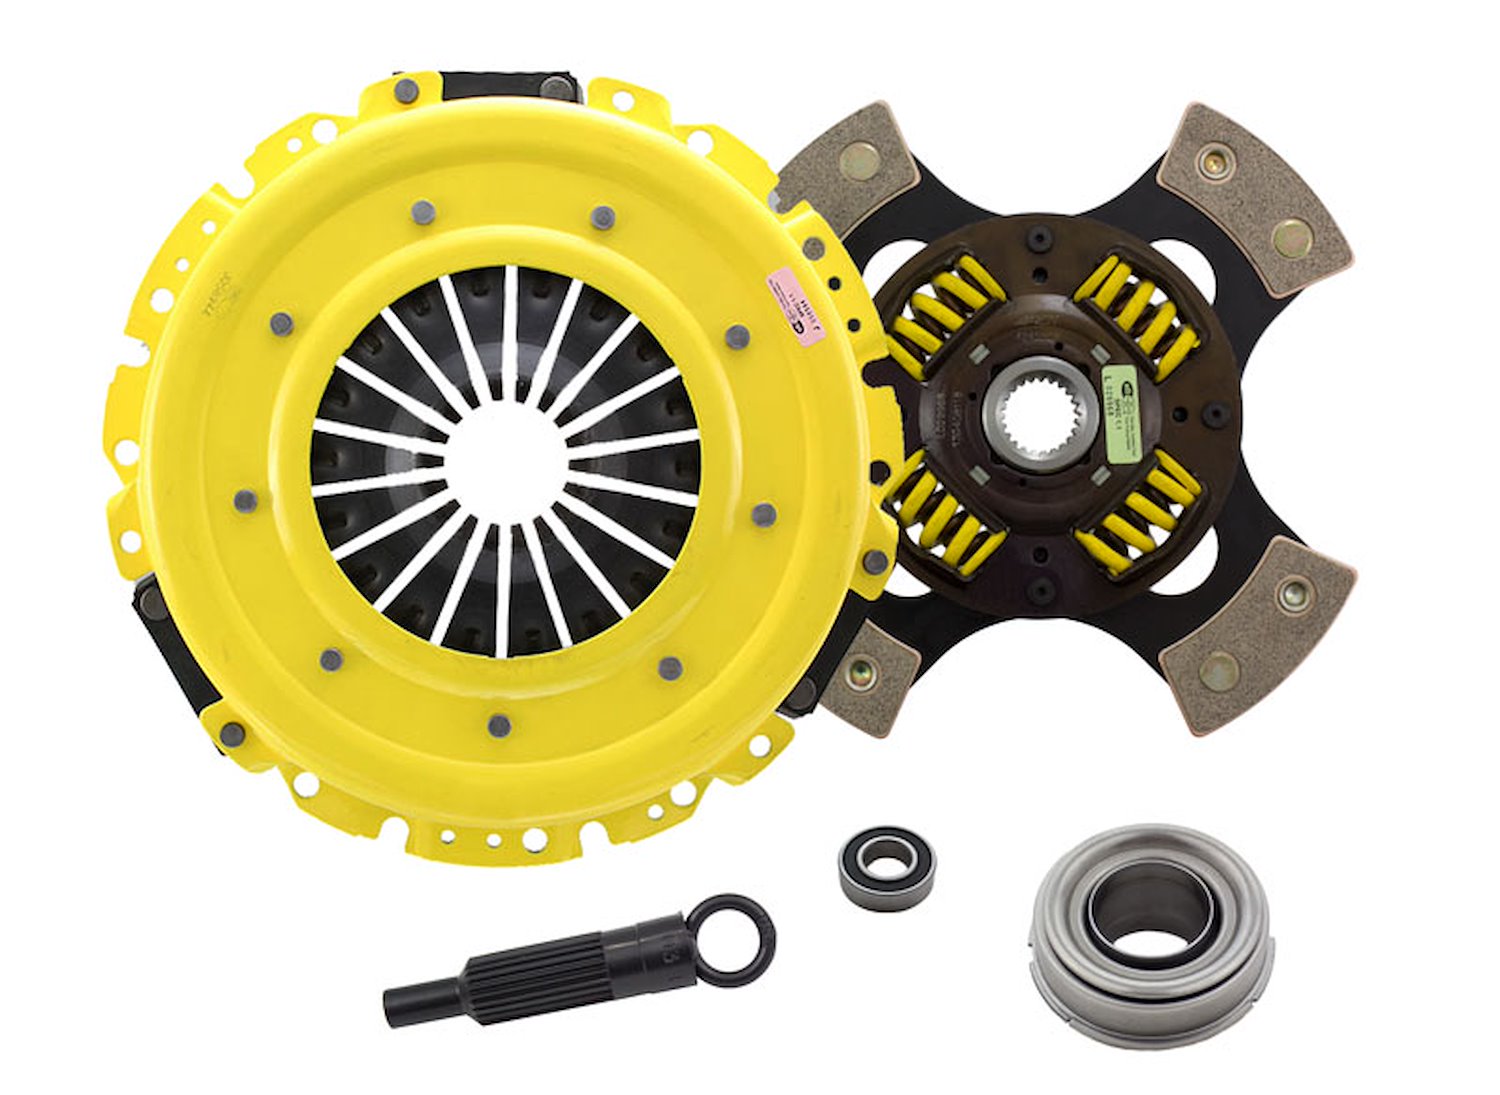 MaXX/Race Sprung 4-Pad Transmission Clutch Kit Fits Select